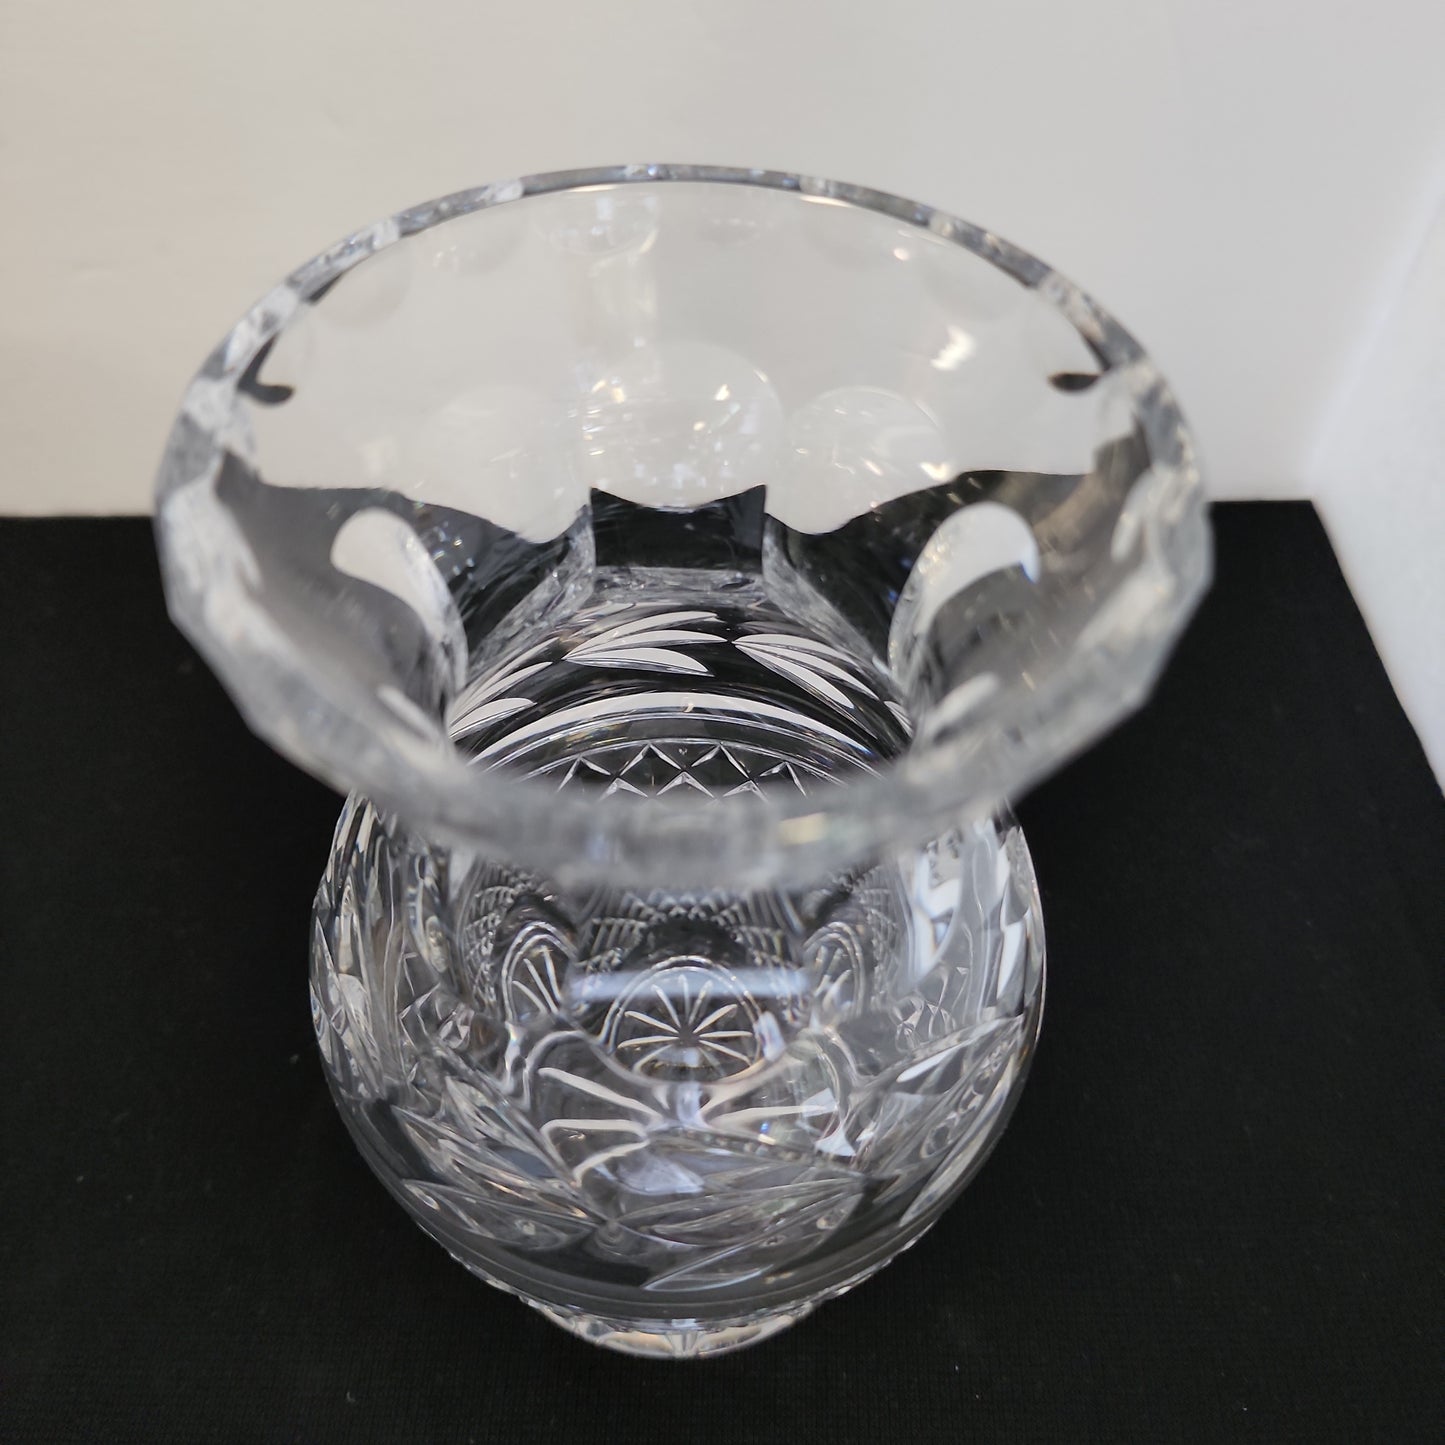 Galway crystal Signed glass vase